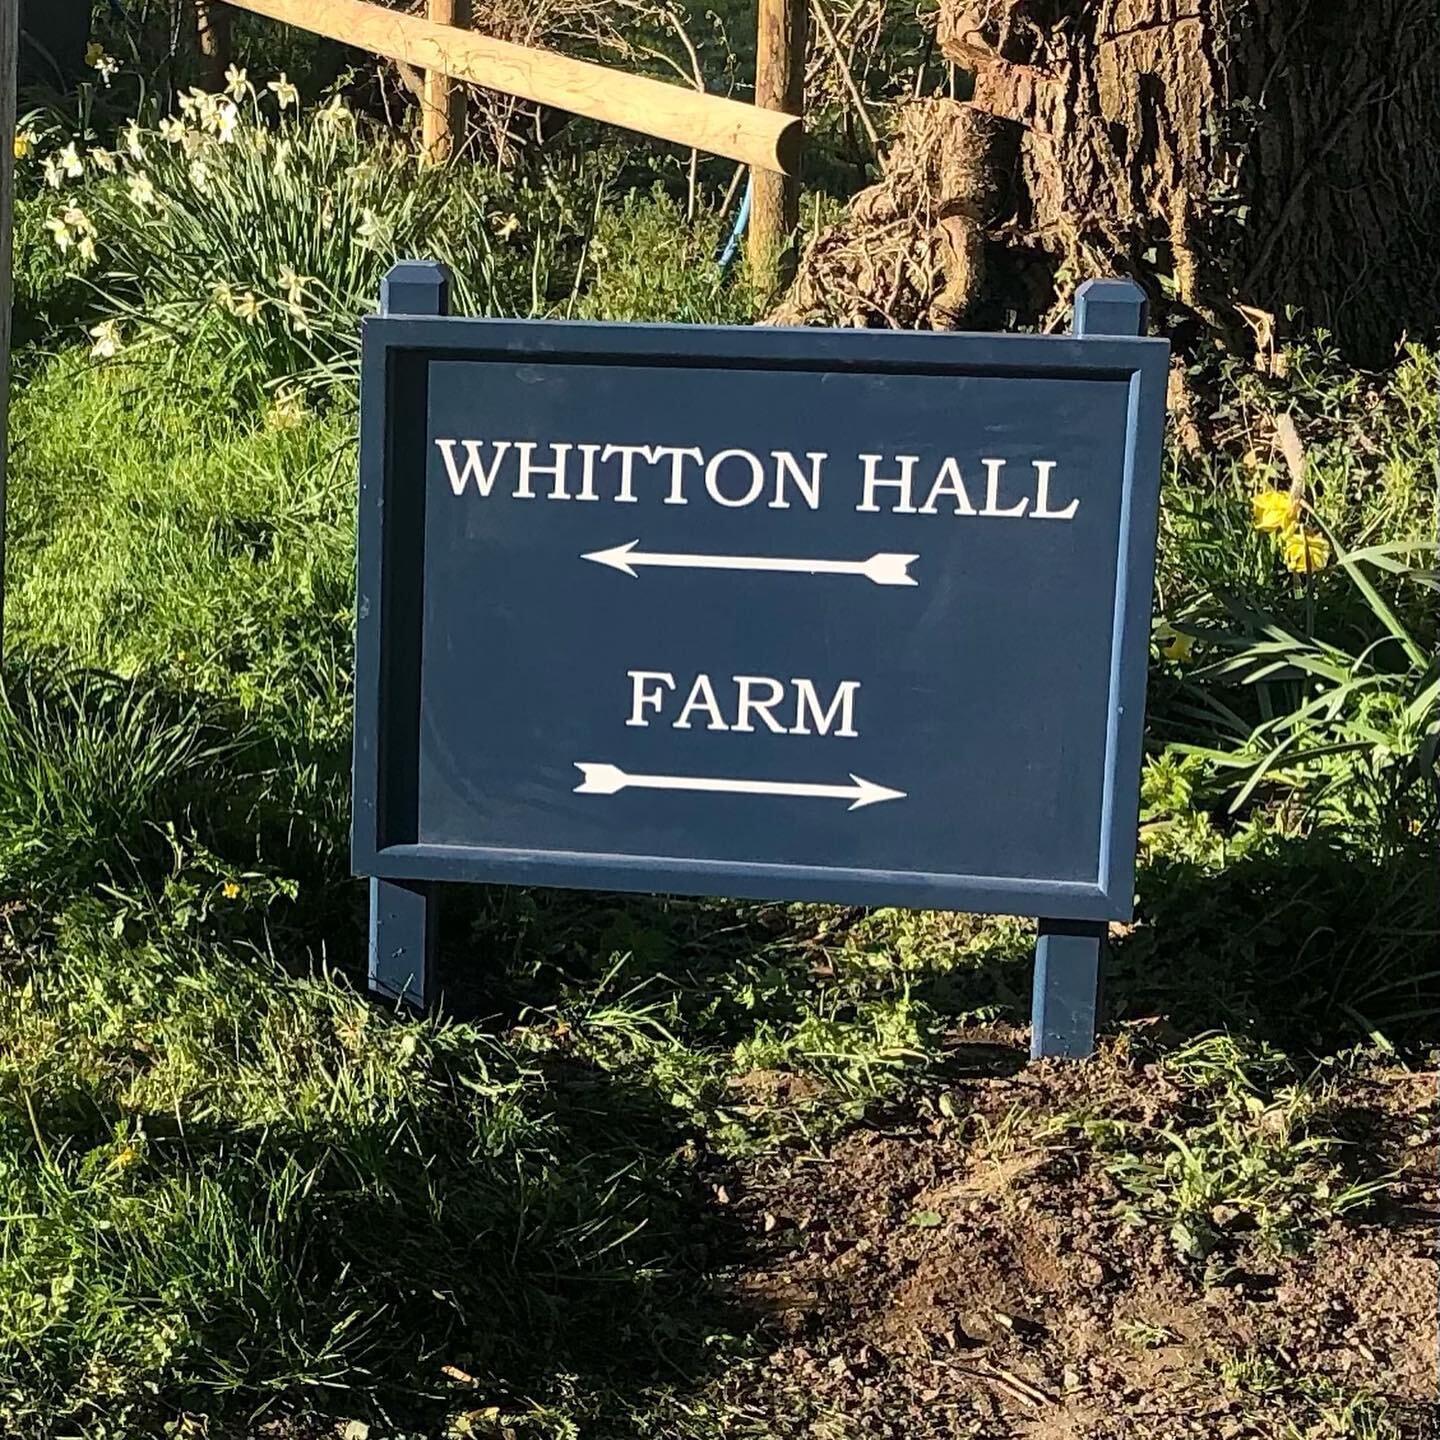 COUNTDOWN TO MAY 17th B&amp;Bs OPENING!
Our new sign is up - painted to match the gates.  Dad&rsquo;s hole in the wall is fixed - lots of preparation before we open up in May.  Dad and Harry reckon the gates open too slowly (the speed merchants) but 